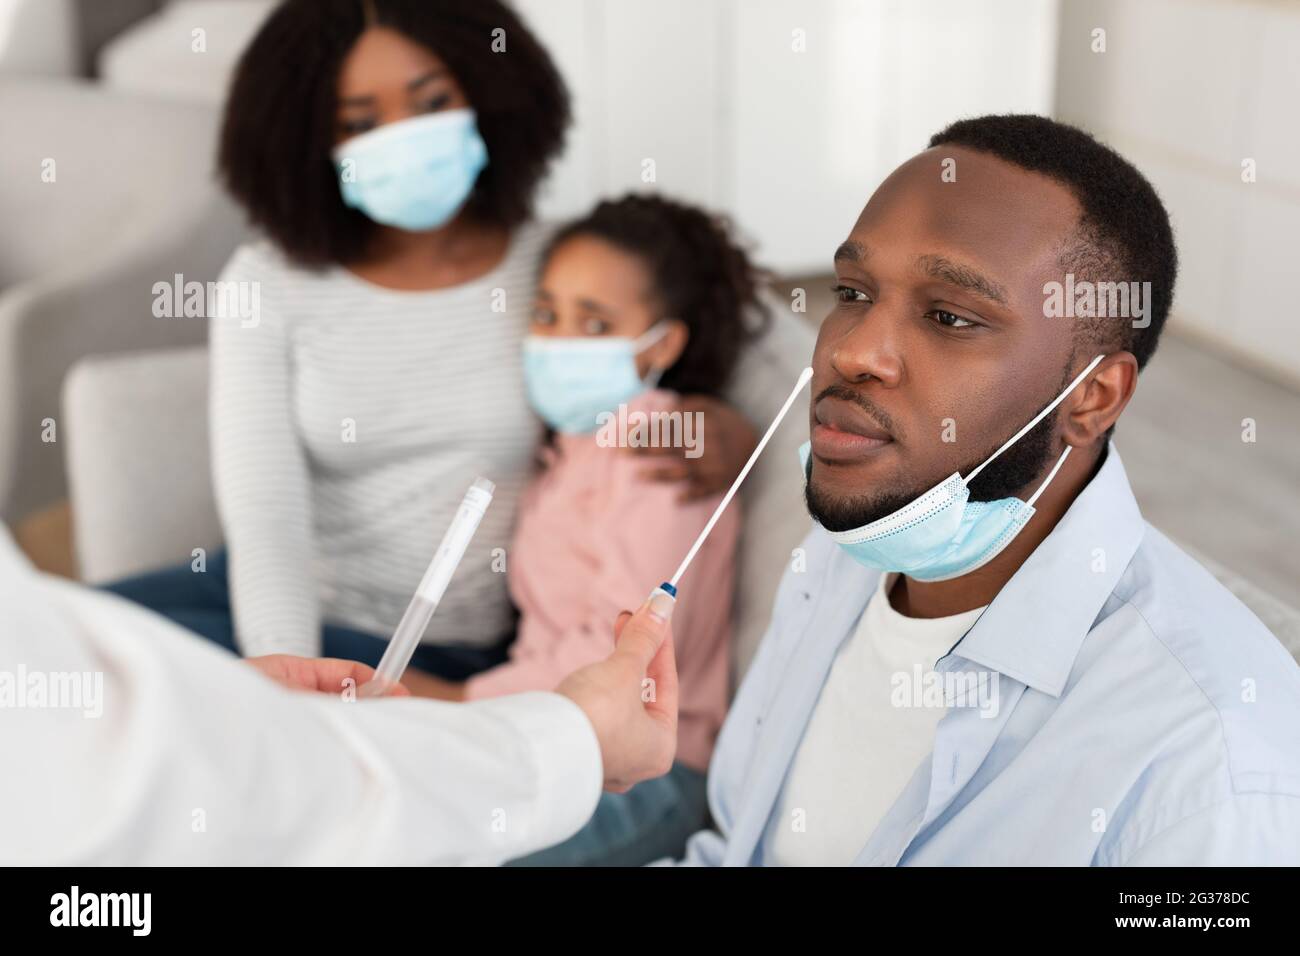 Doctor taking PCR test sample from potentially infected black man Stock Photo